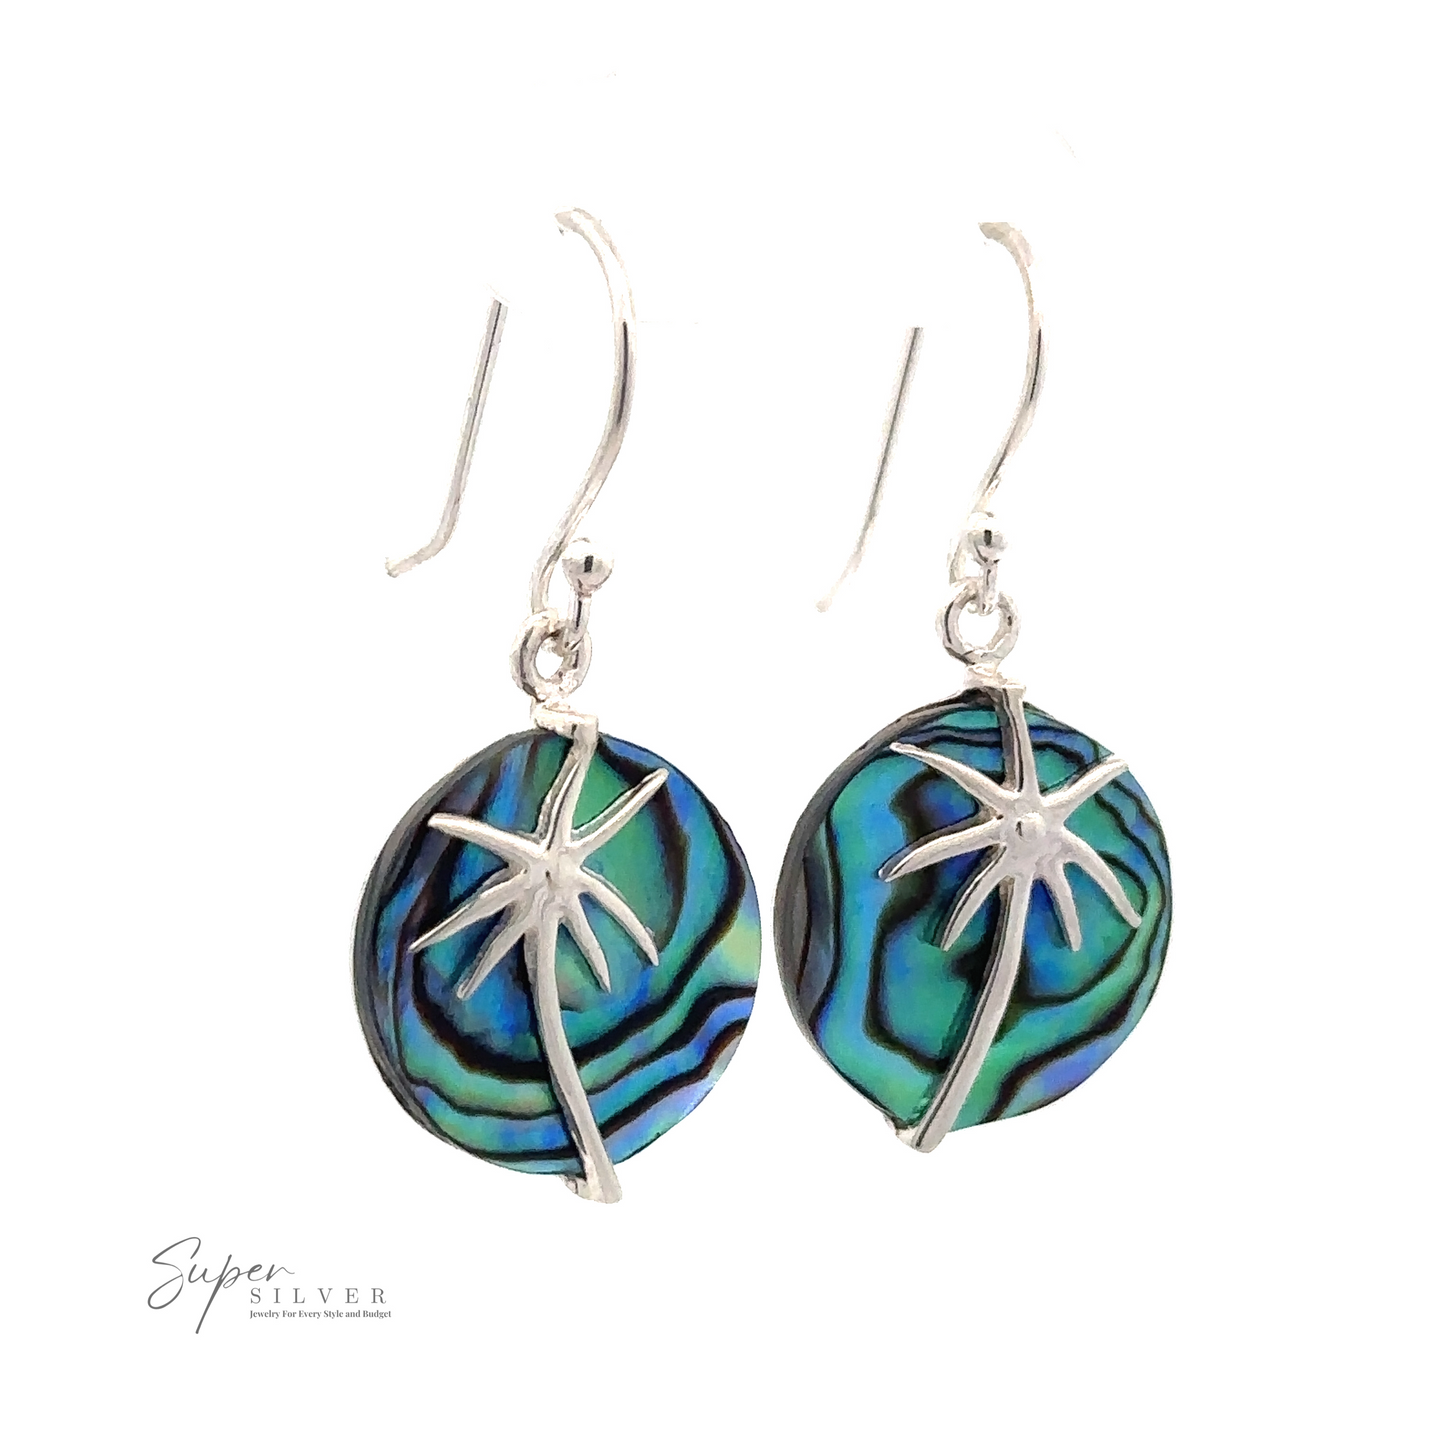 Stone Earrings with Silver Palm Tree featuring round abalone shell inlays and French hook ear wires.